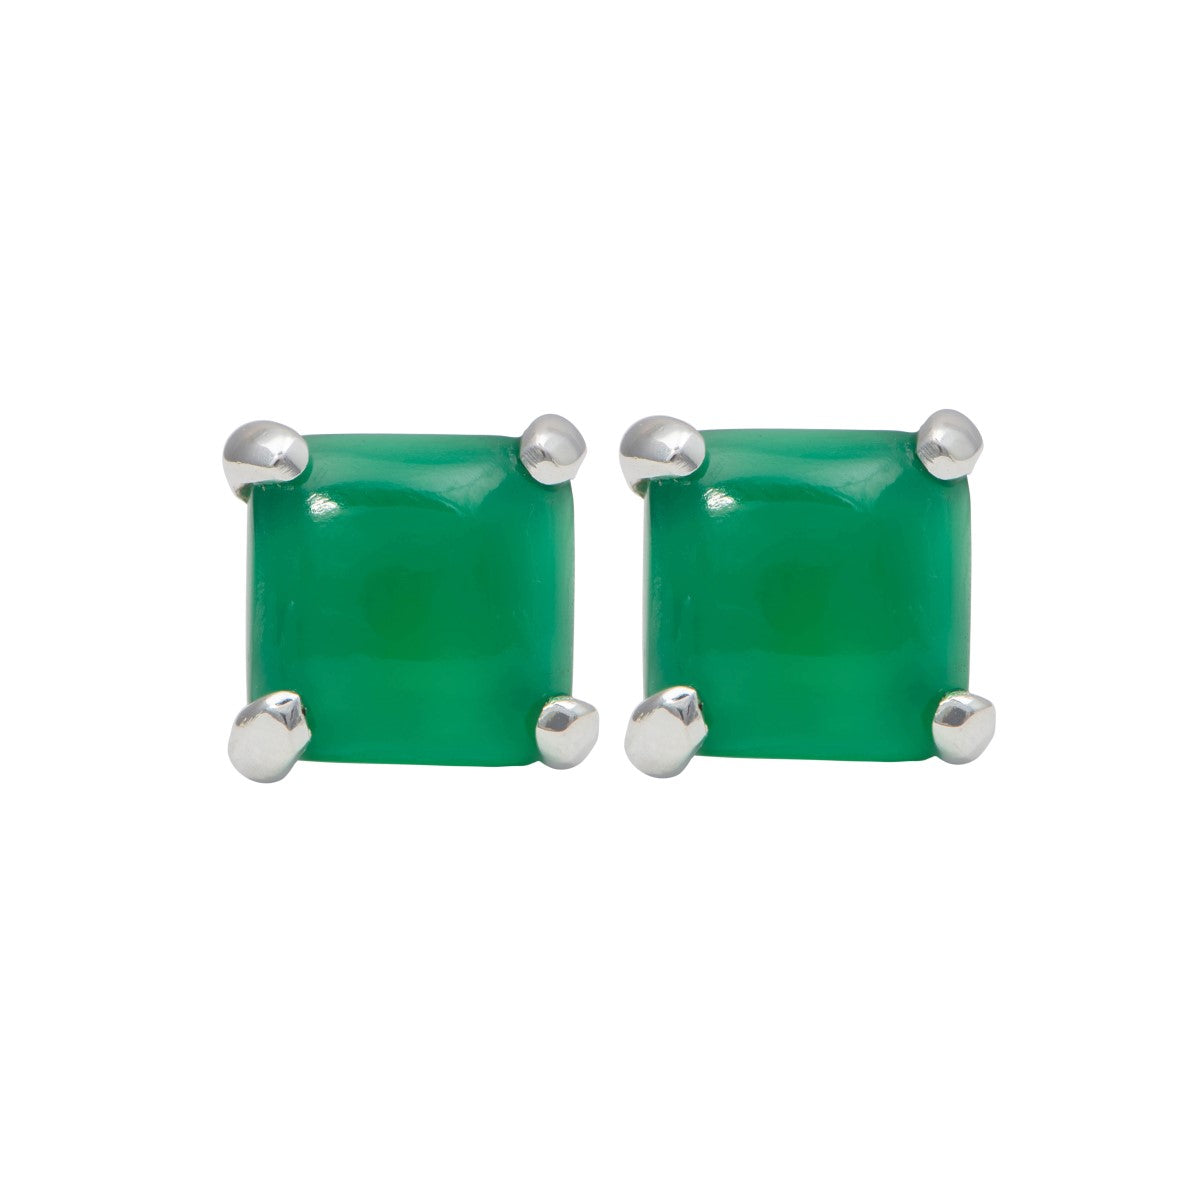 Square Cabochon Green Onyx Stud Earrings in Sterling Silver